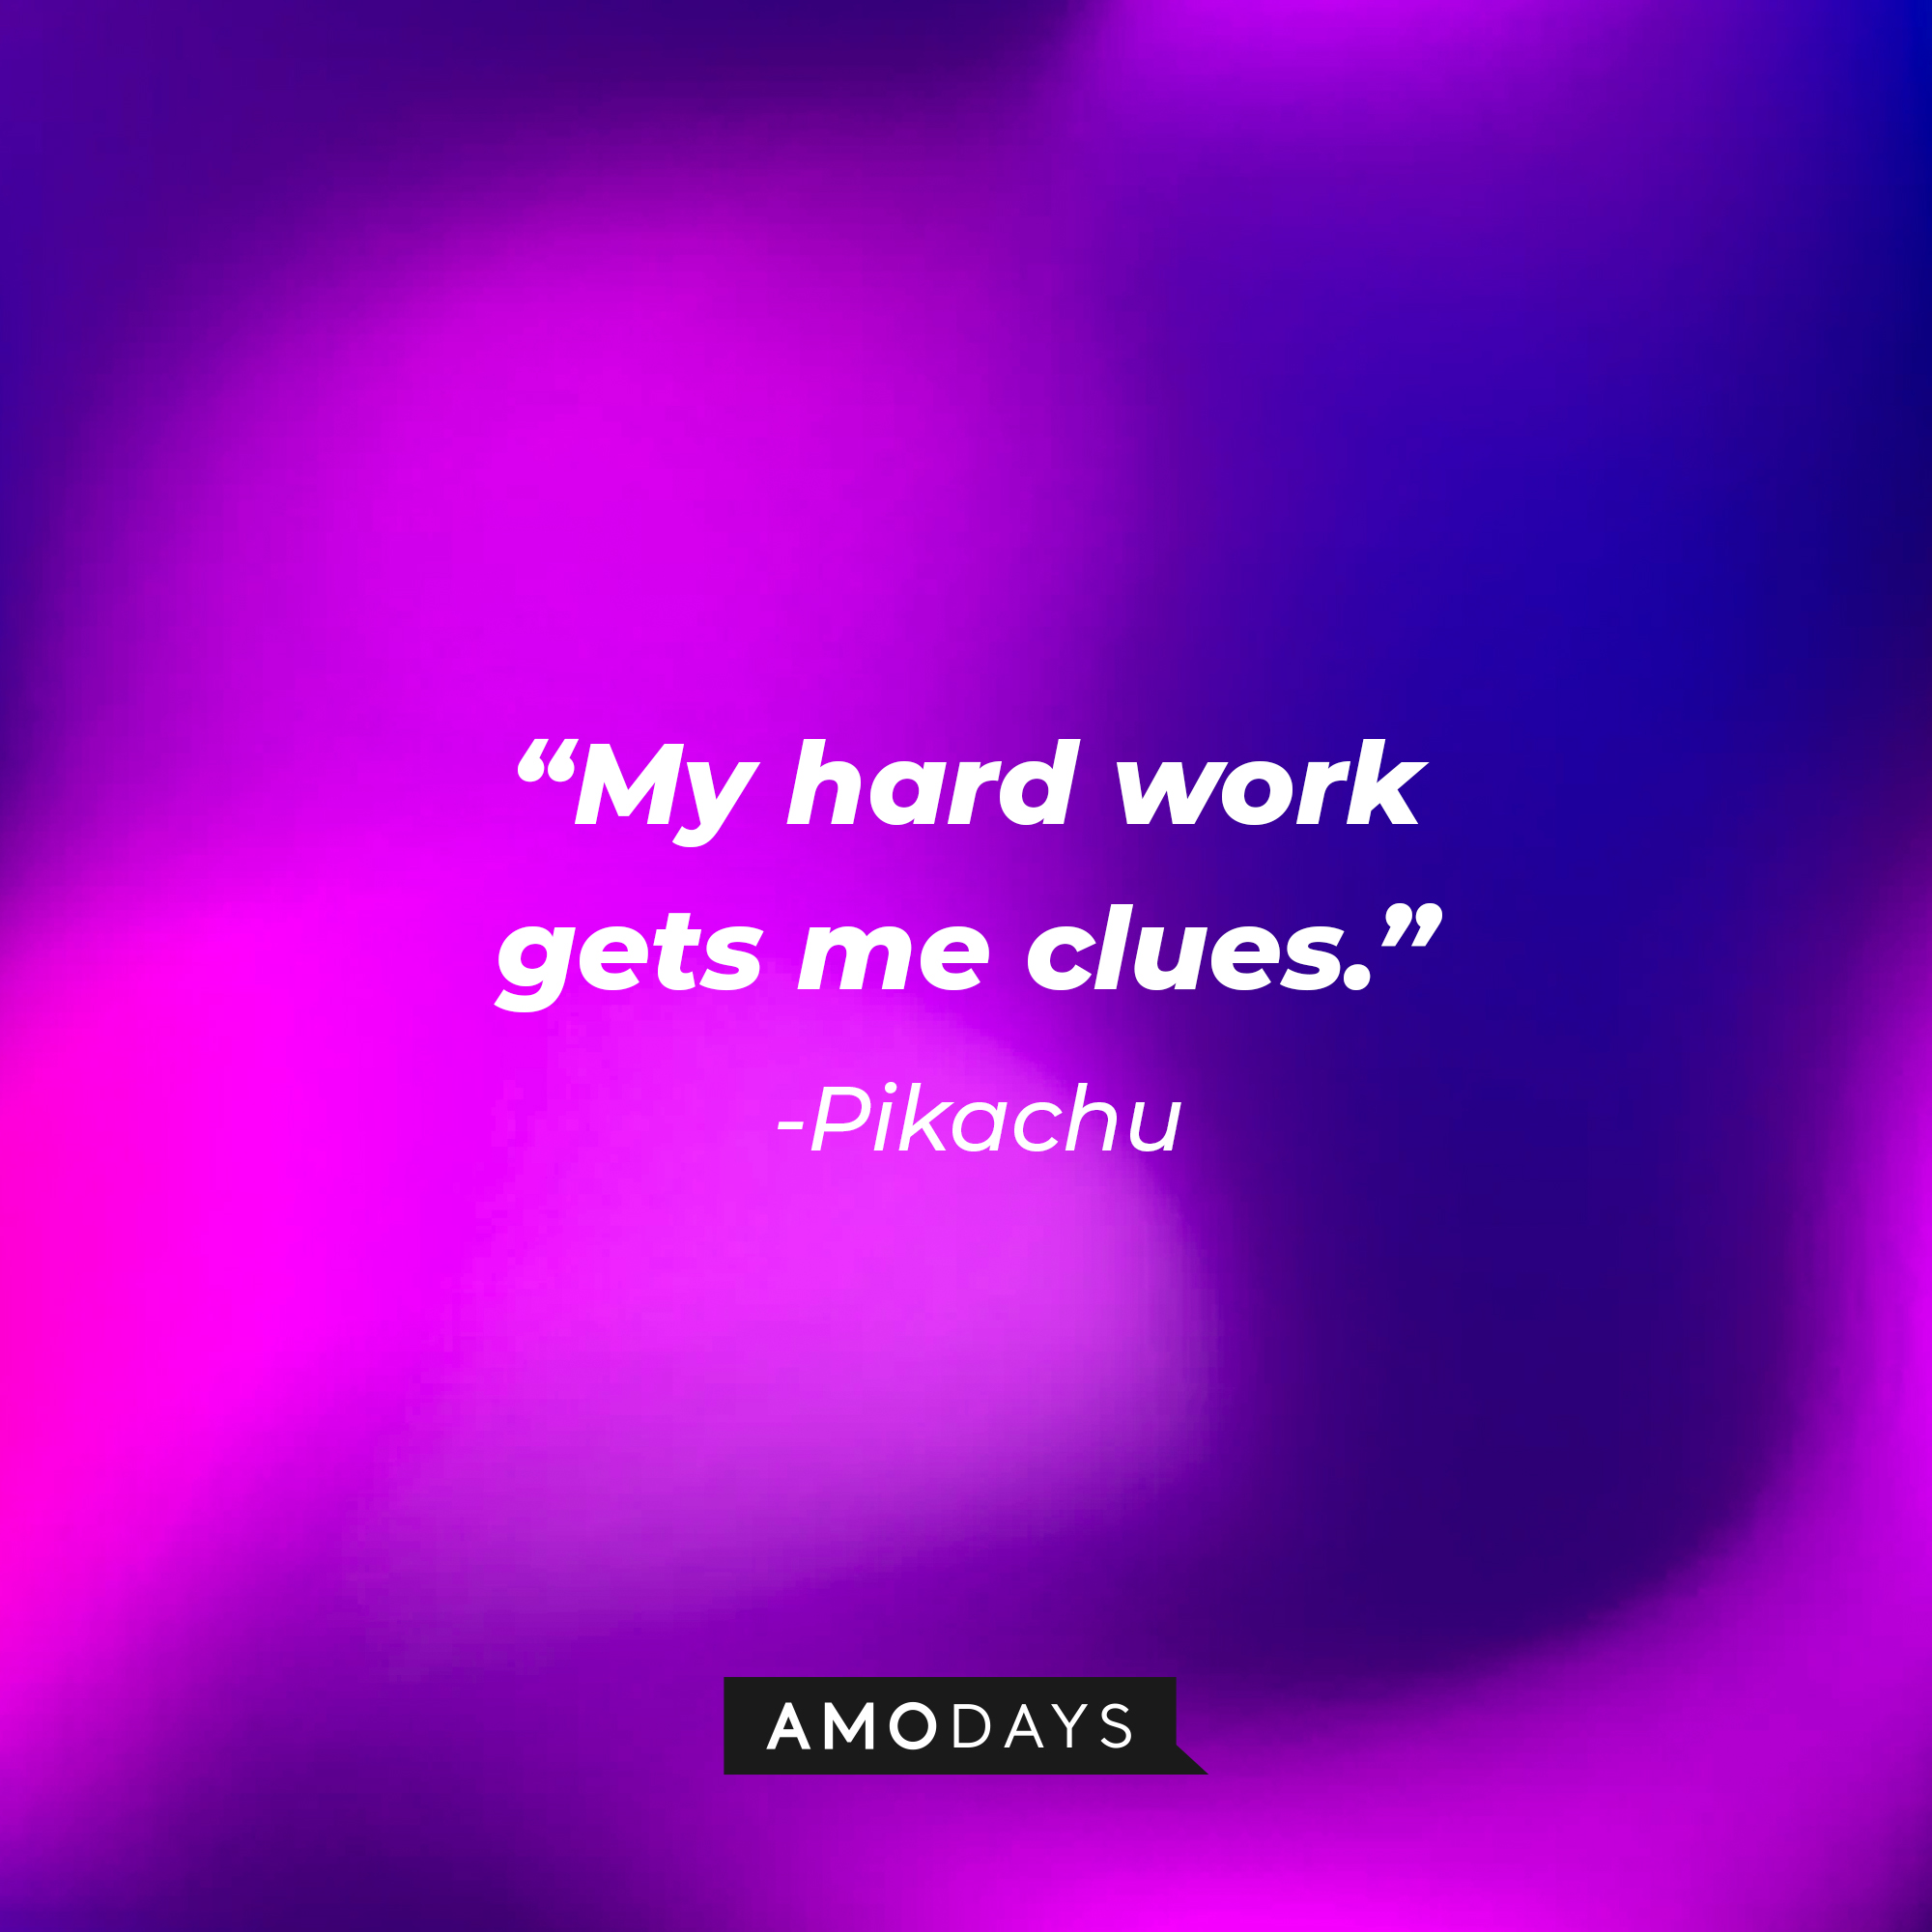 Pikachu's quote: "My hard work gets me clues." | Source: AmoDays